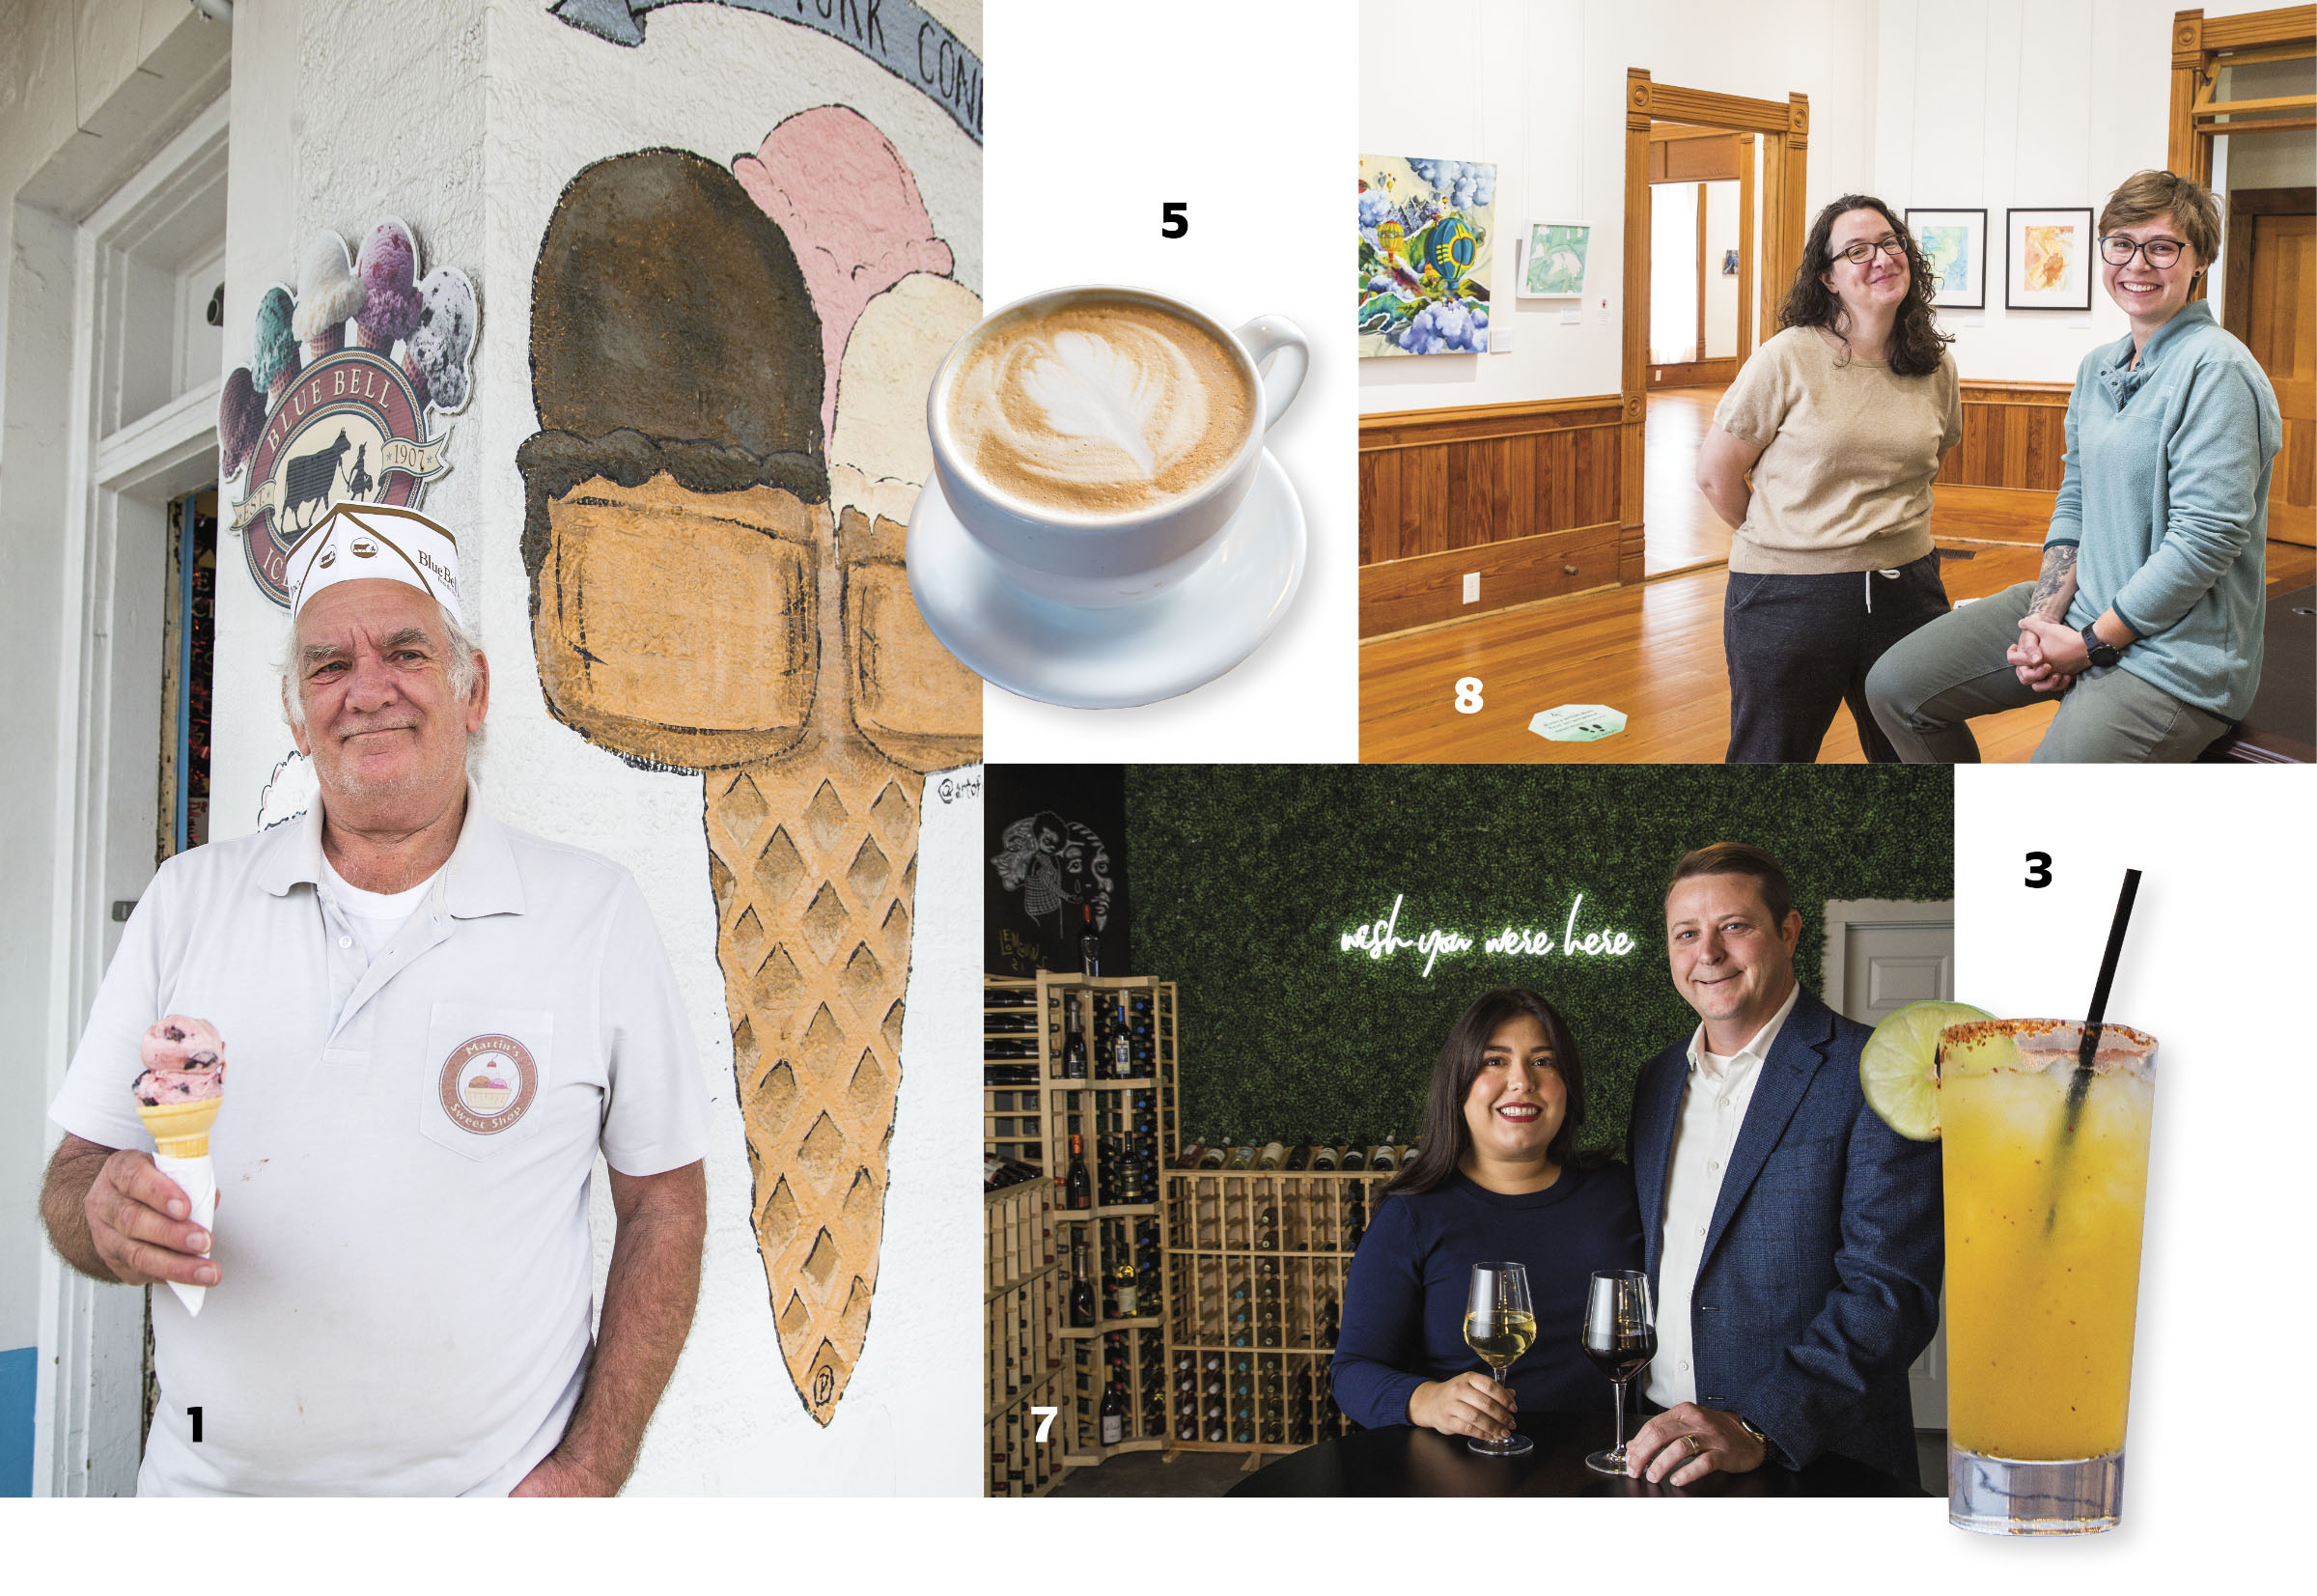 A collection of images described below, including a man holding an ice cream cone, a carefully poured latte in a white mug, a woman smiling in an art gallery, and a bright orange cocktail garnished with lime